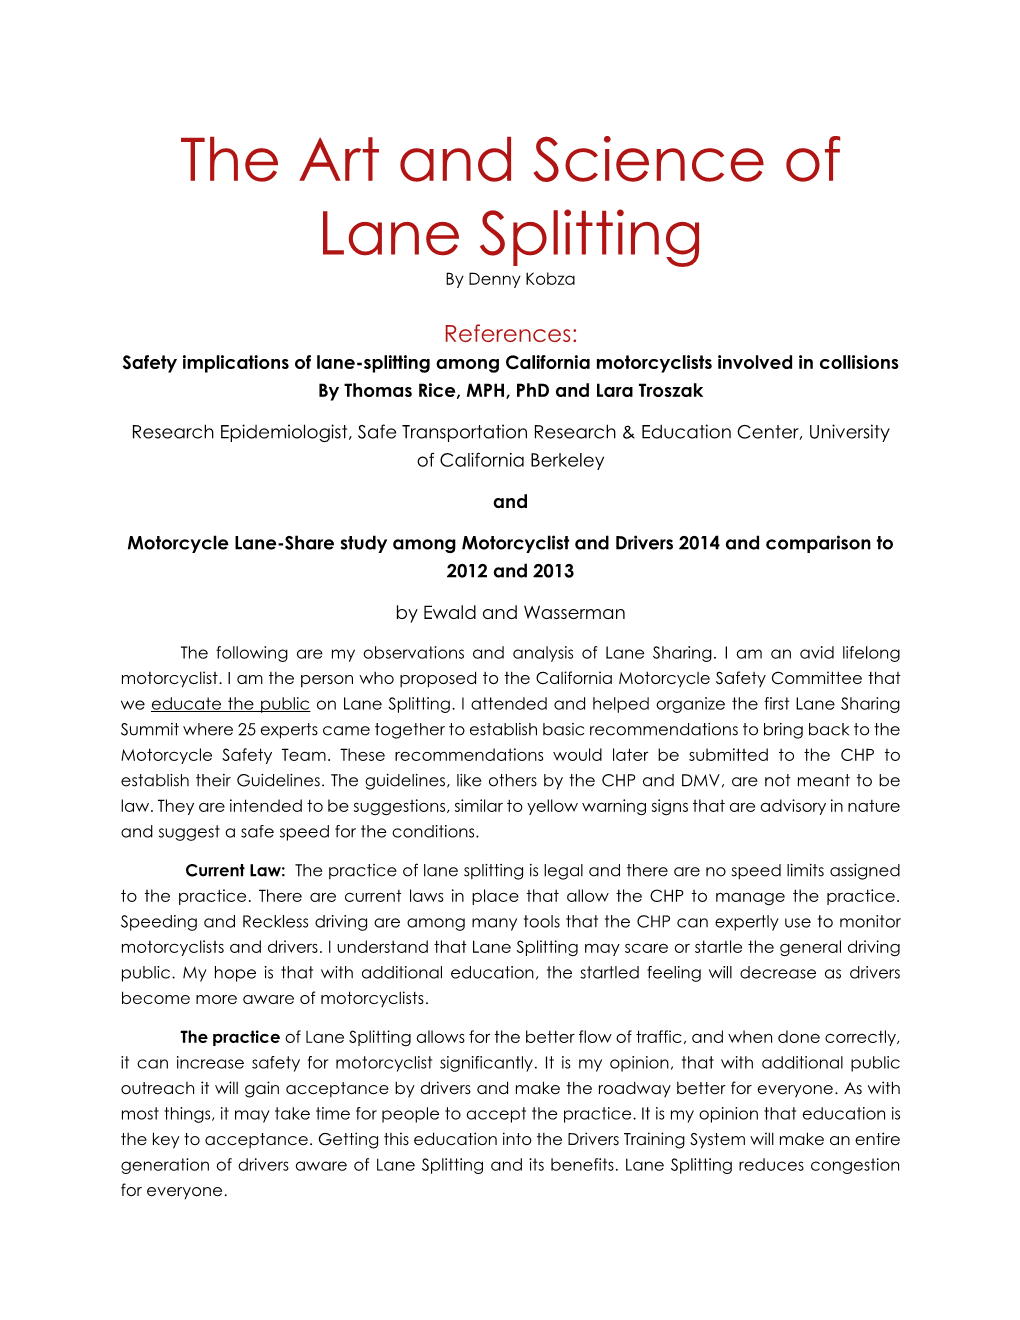 The Art and Science of Lane Splitting by Denny Kobza